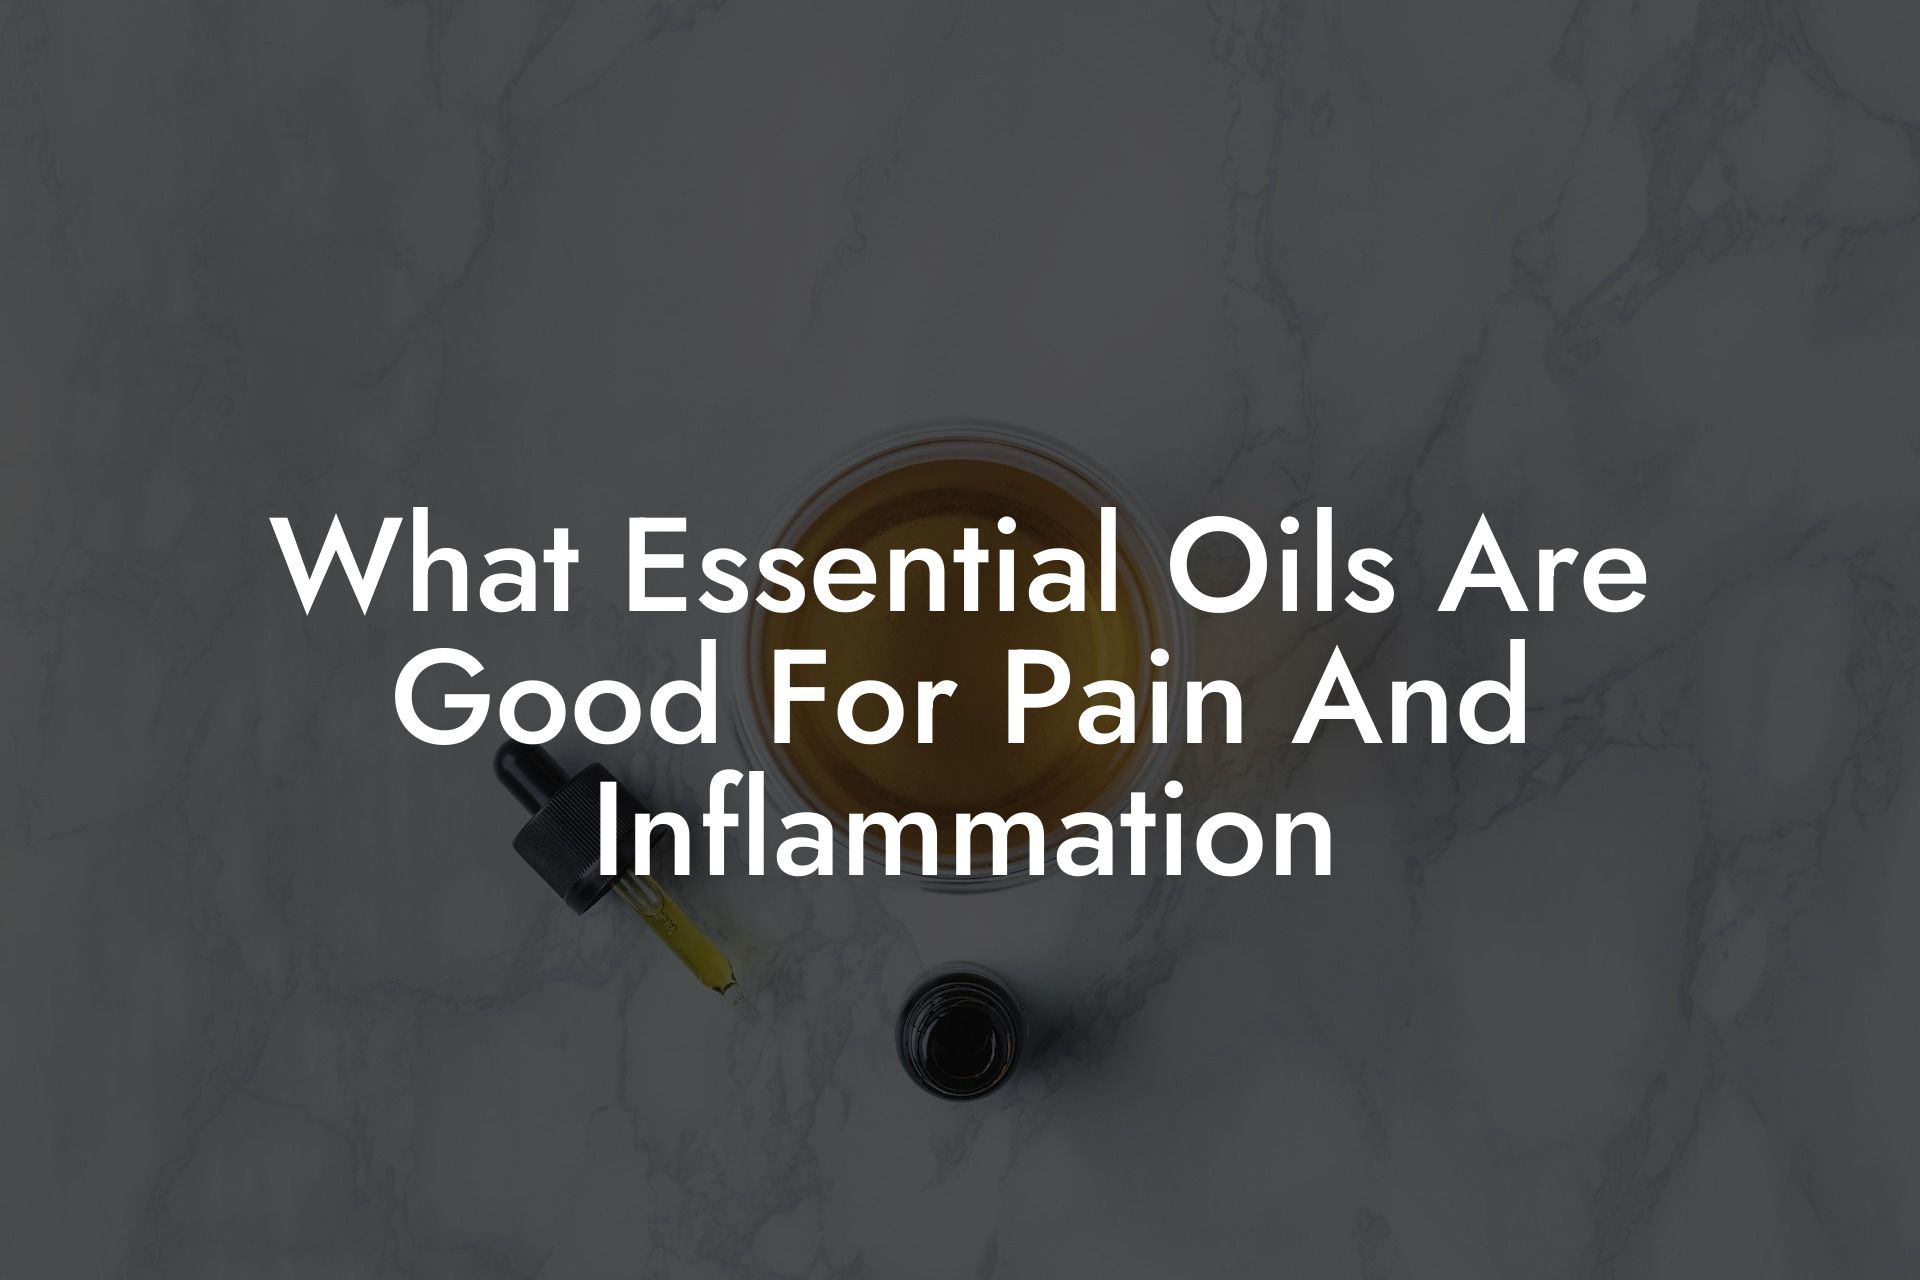 What Essential Oils Are Good For Pain And Inflammation